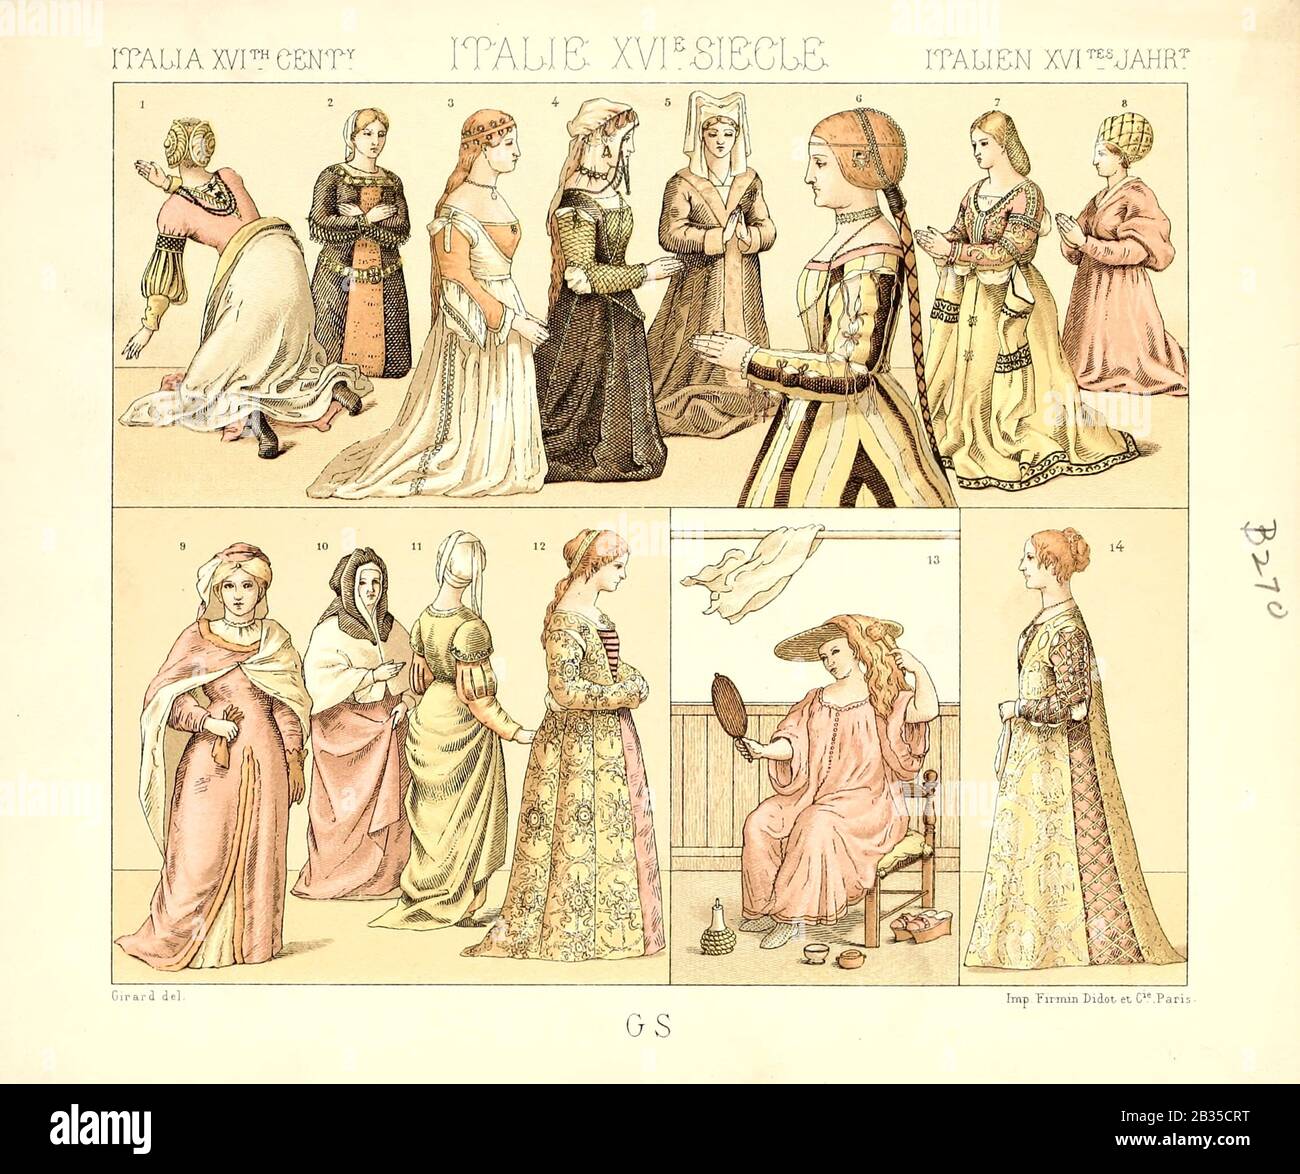 Ancient Italian fashion and lifestyle, 16th century from Geschichte des  kostums in chronologischer entwicklung (History of the costume in  chronological development) by Racinet, A. (Auguste), 1825-1893. and  Rosenberg, Adolf, 1850-1906, Volume 3